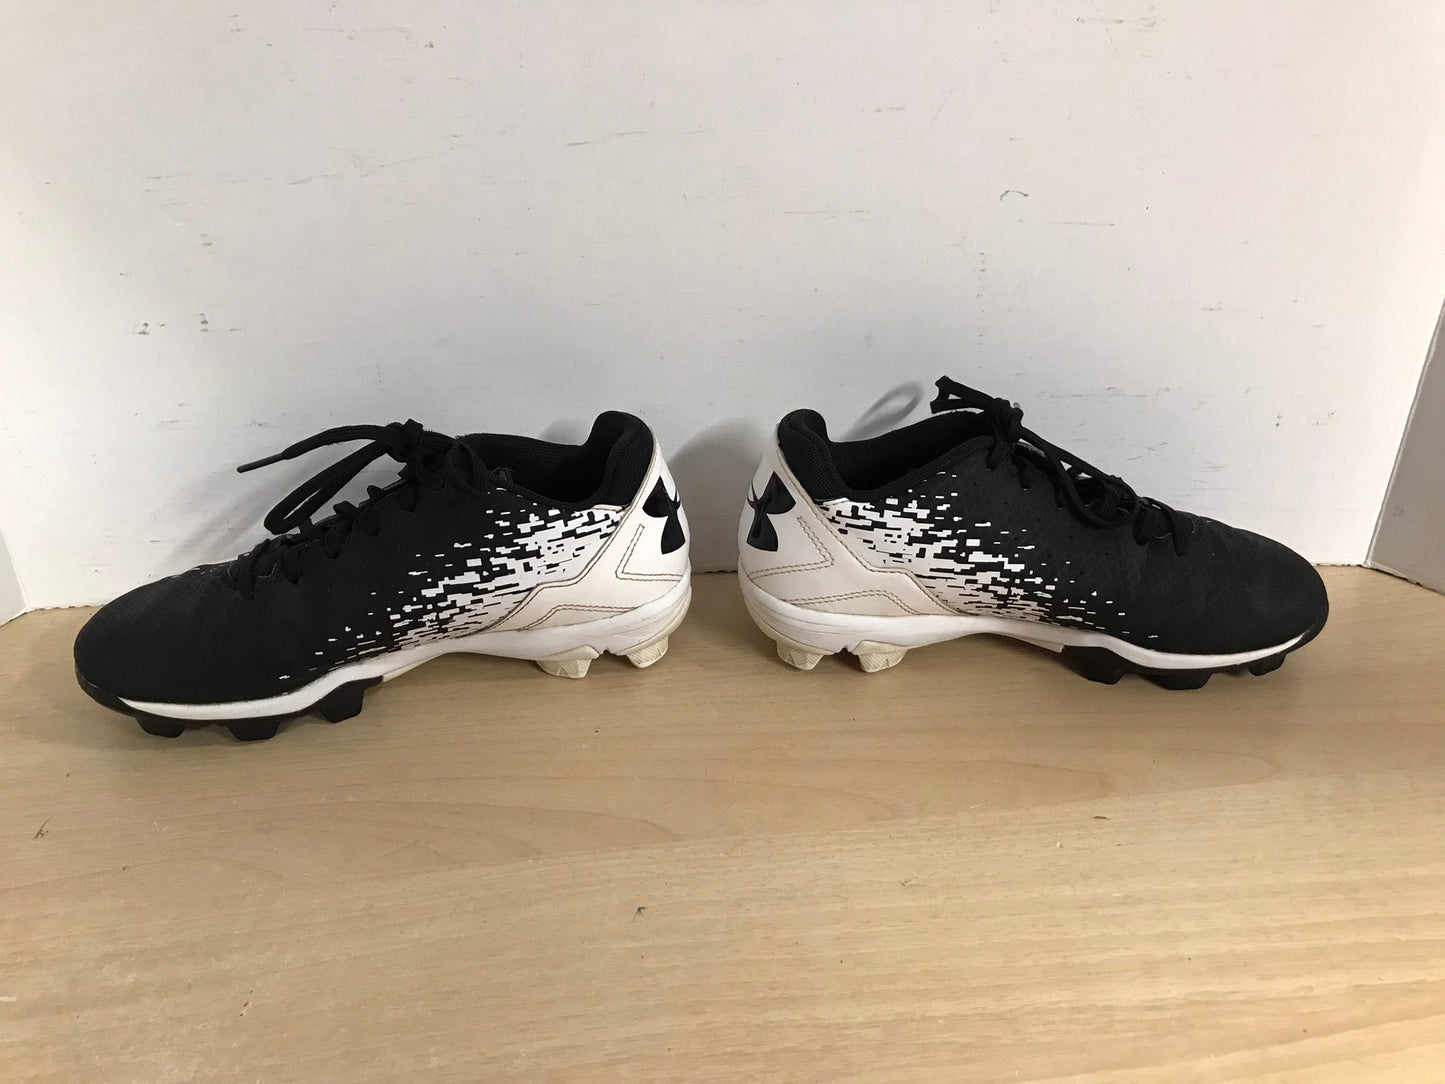 Baseball Shoes Cleats Child Size 3 Under Armor Black White